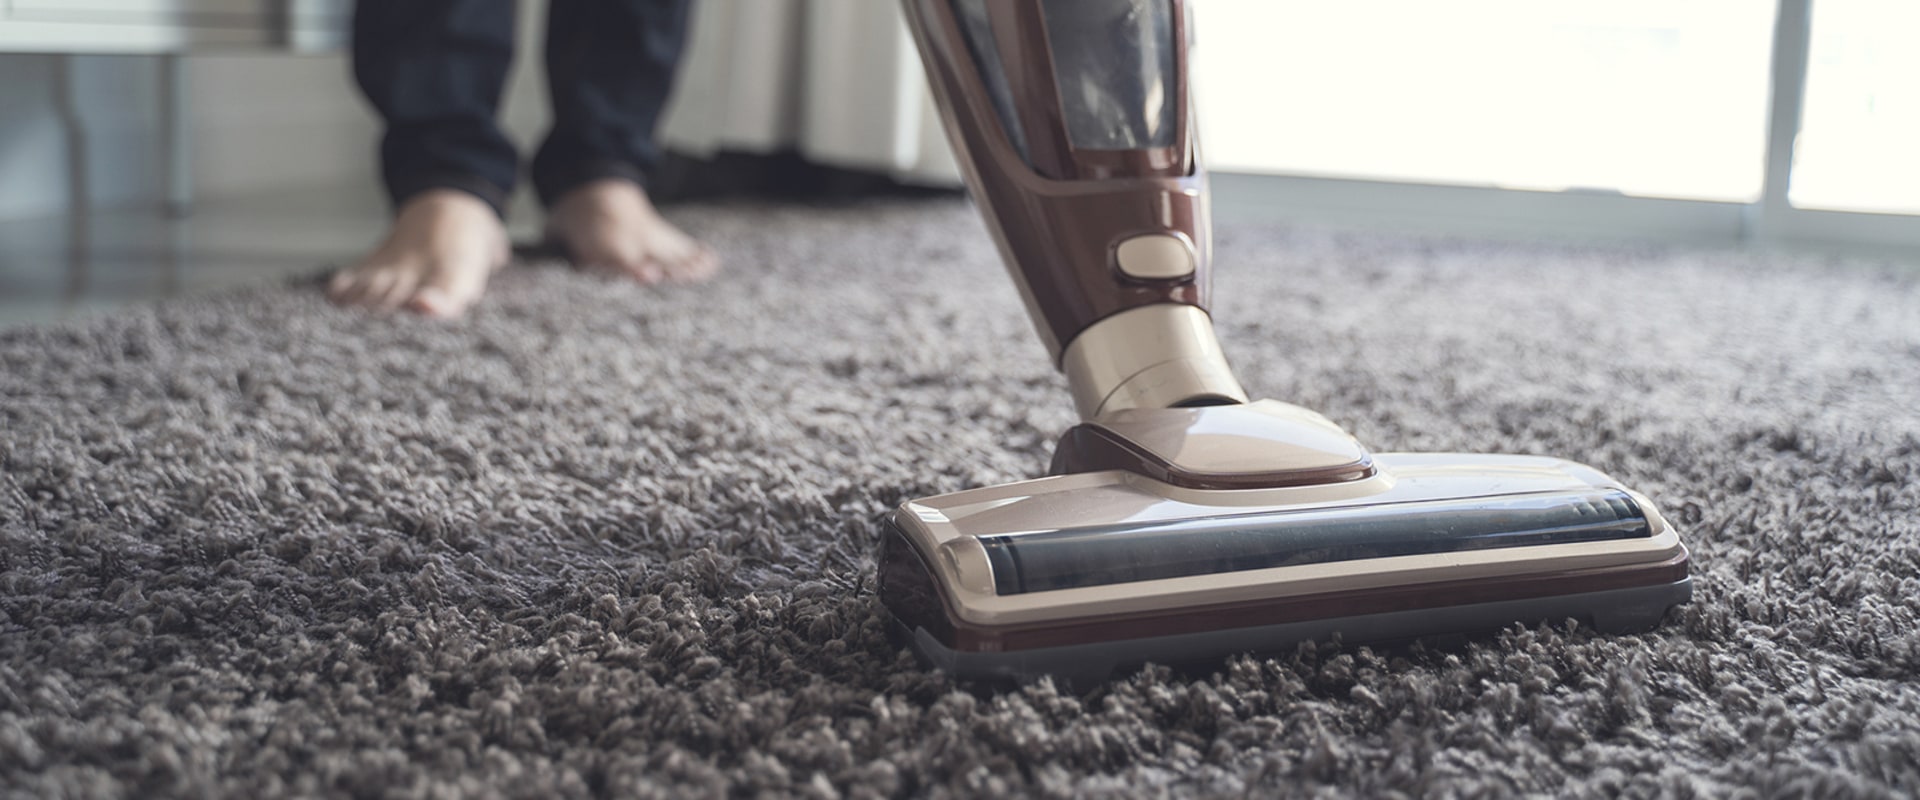 How often should you vacuum carpets and rugs?